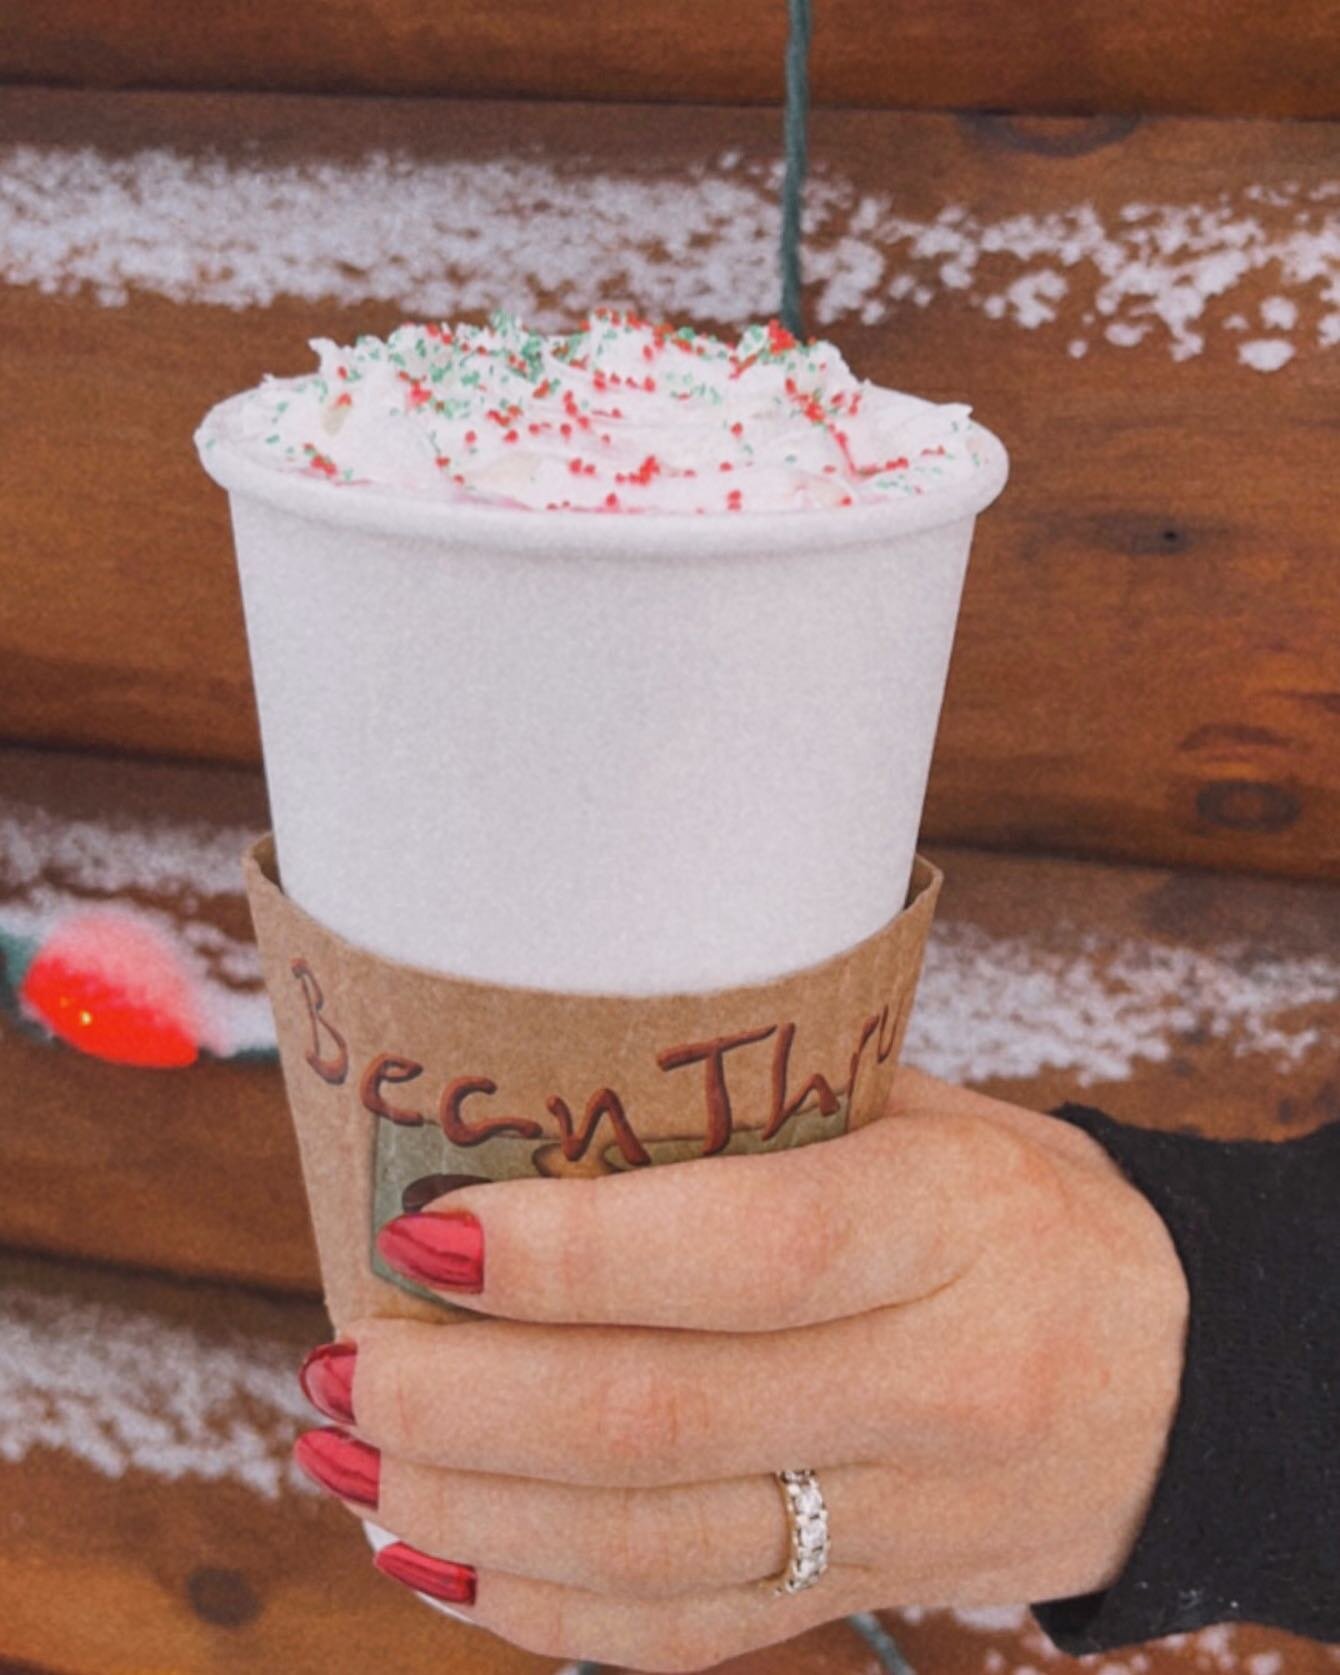 Warm up your chilly morning commute with a holiday latte! 🎄